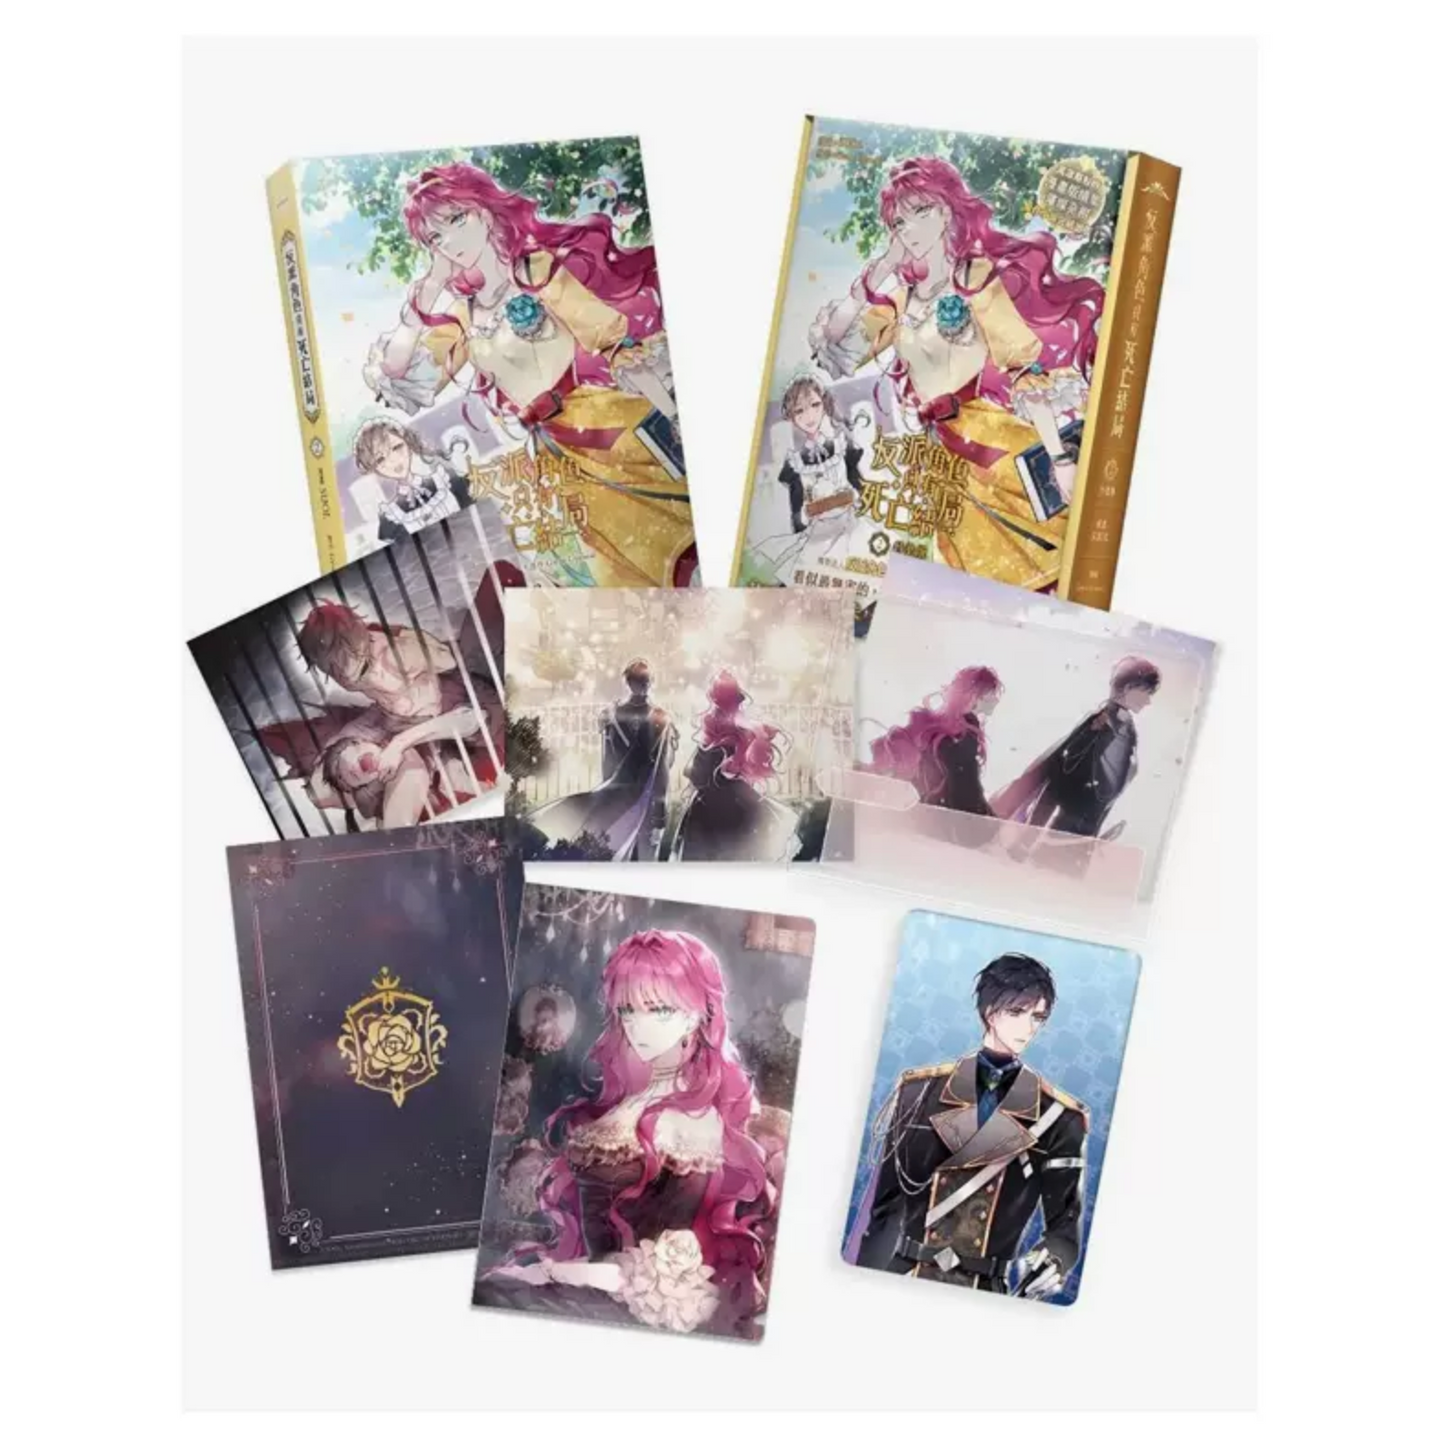 [Limited Edition, Taiwan] Death Is The Only Ending For The Villain Vol.2 by SUOL, villains are destined to die